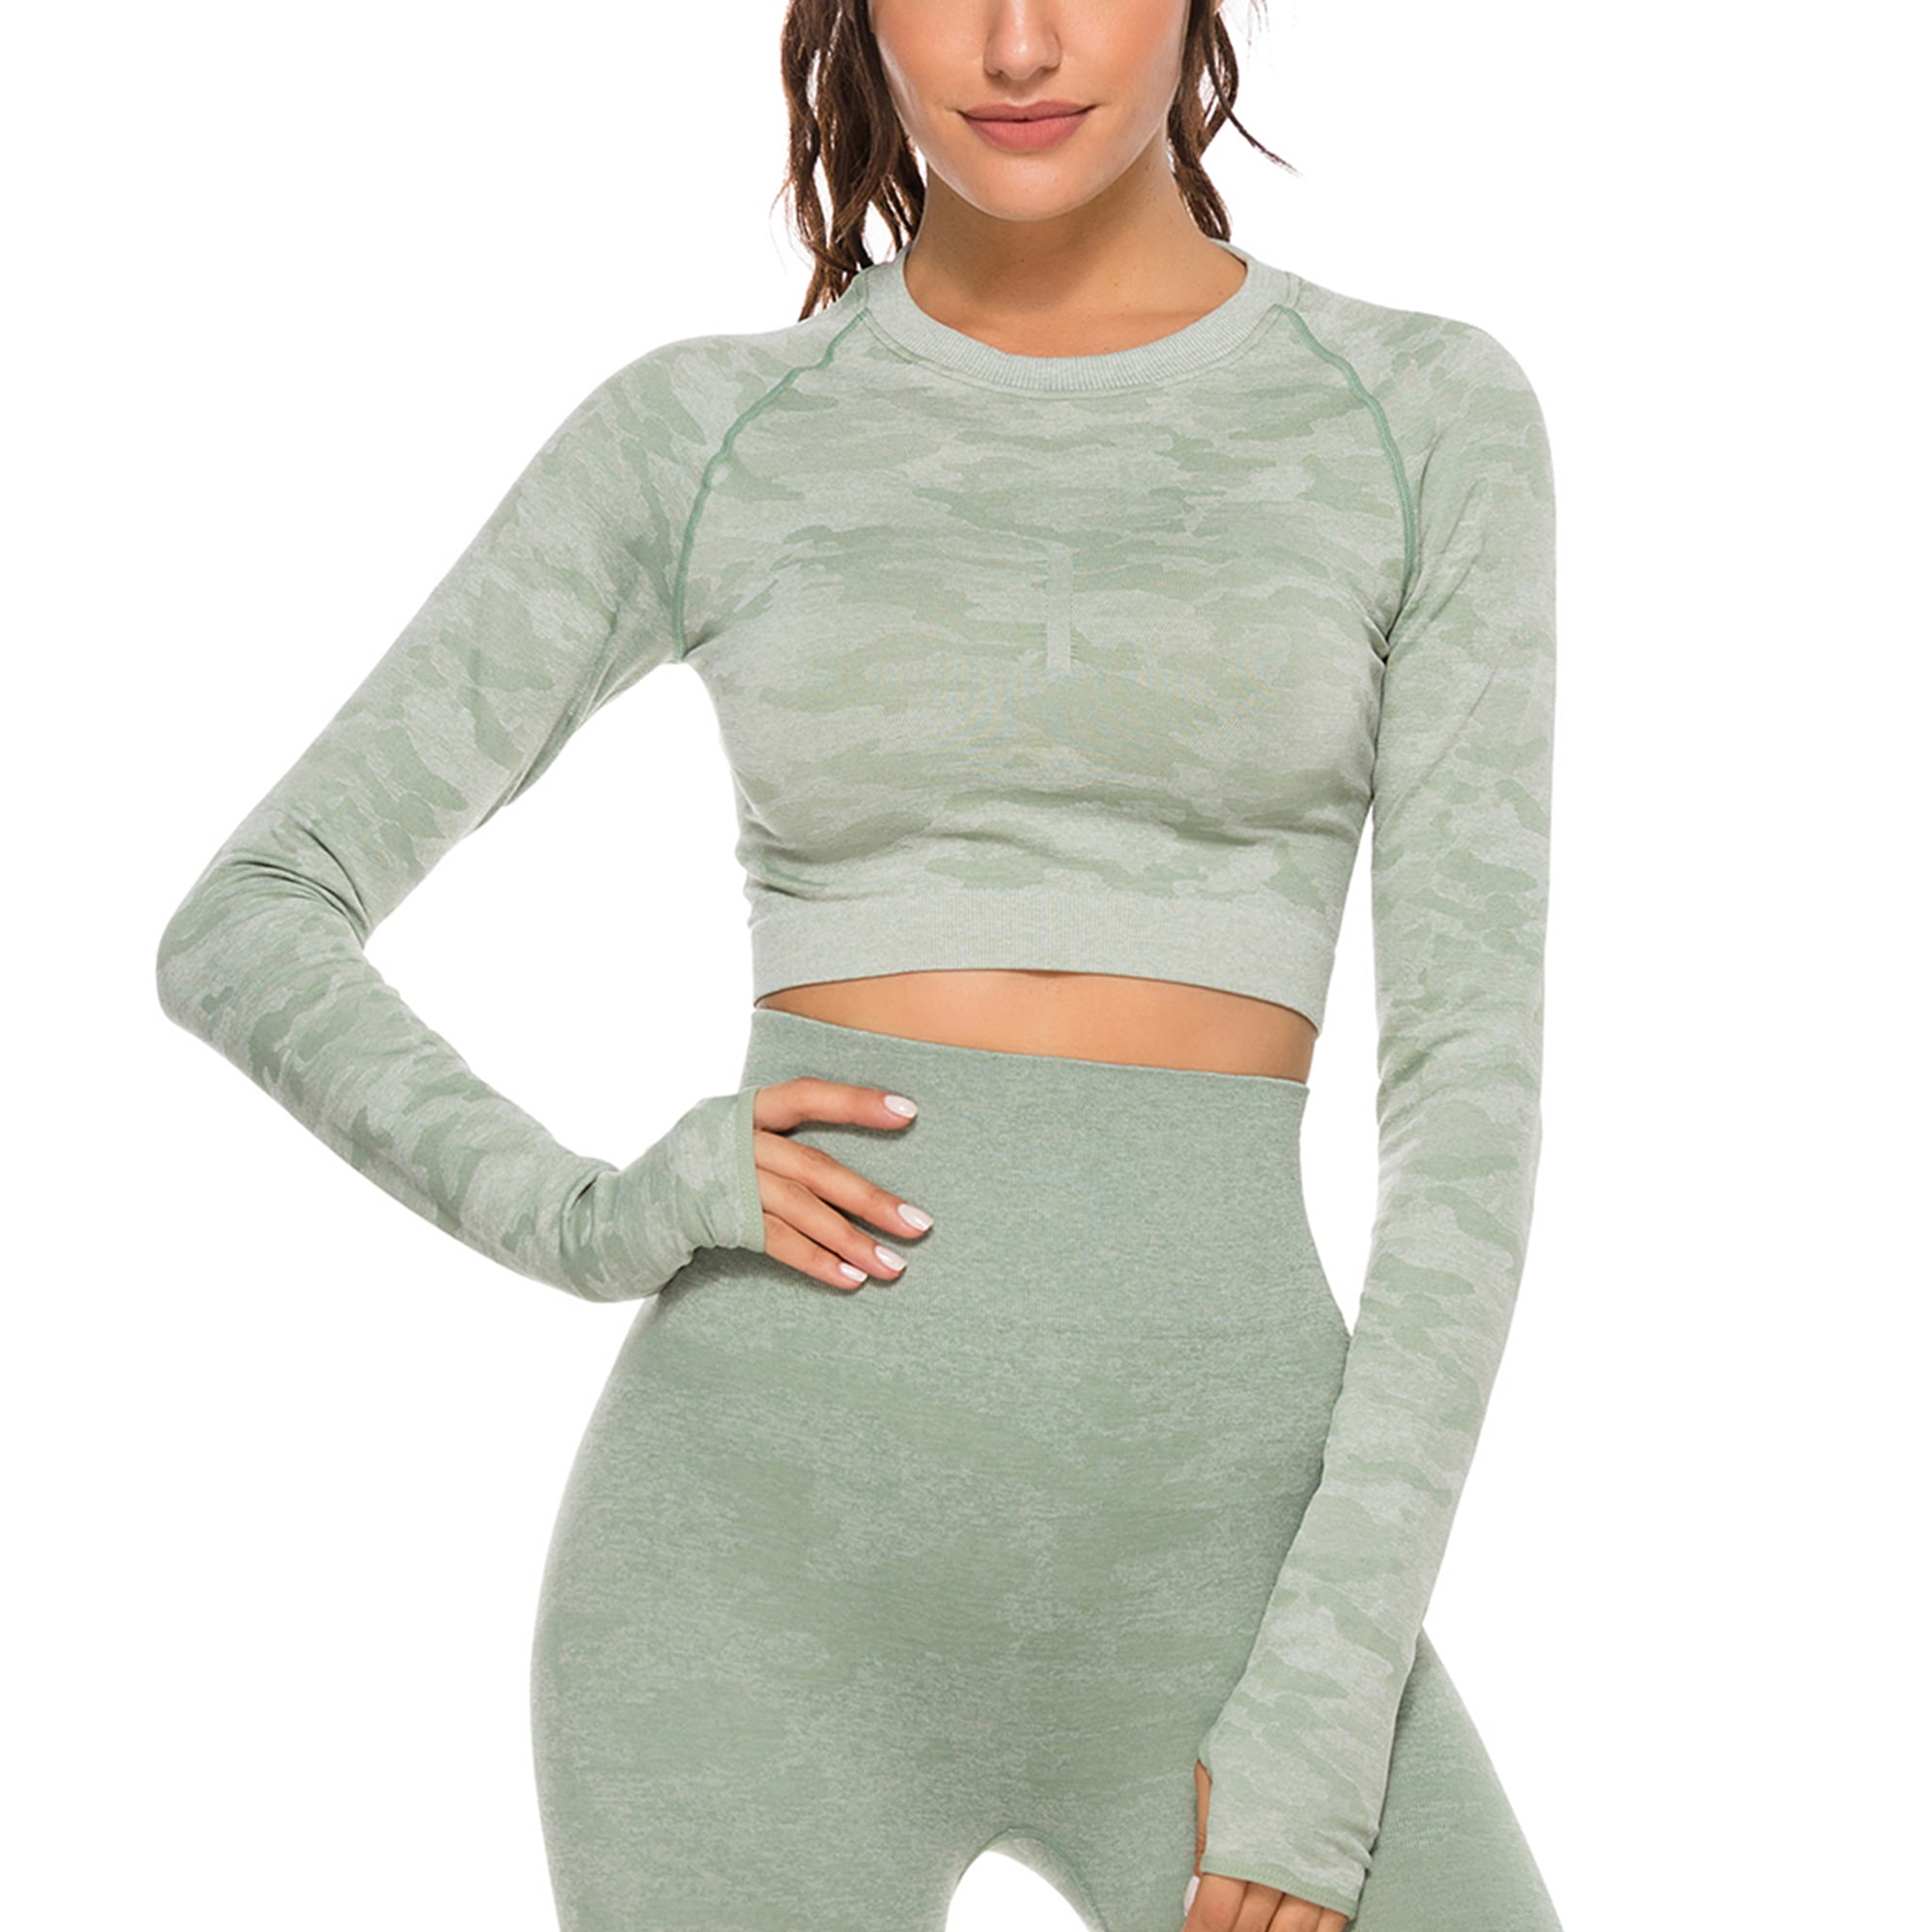 Sparks Fly Shop-athletic-shirts Seamless Long Sleeve Woman Gym Crop Yoga Top Sweatshirt Tops Fitness Sport T-Shirt 